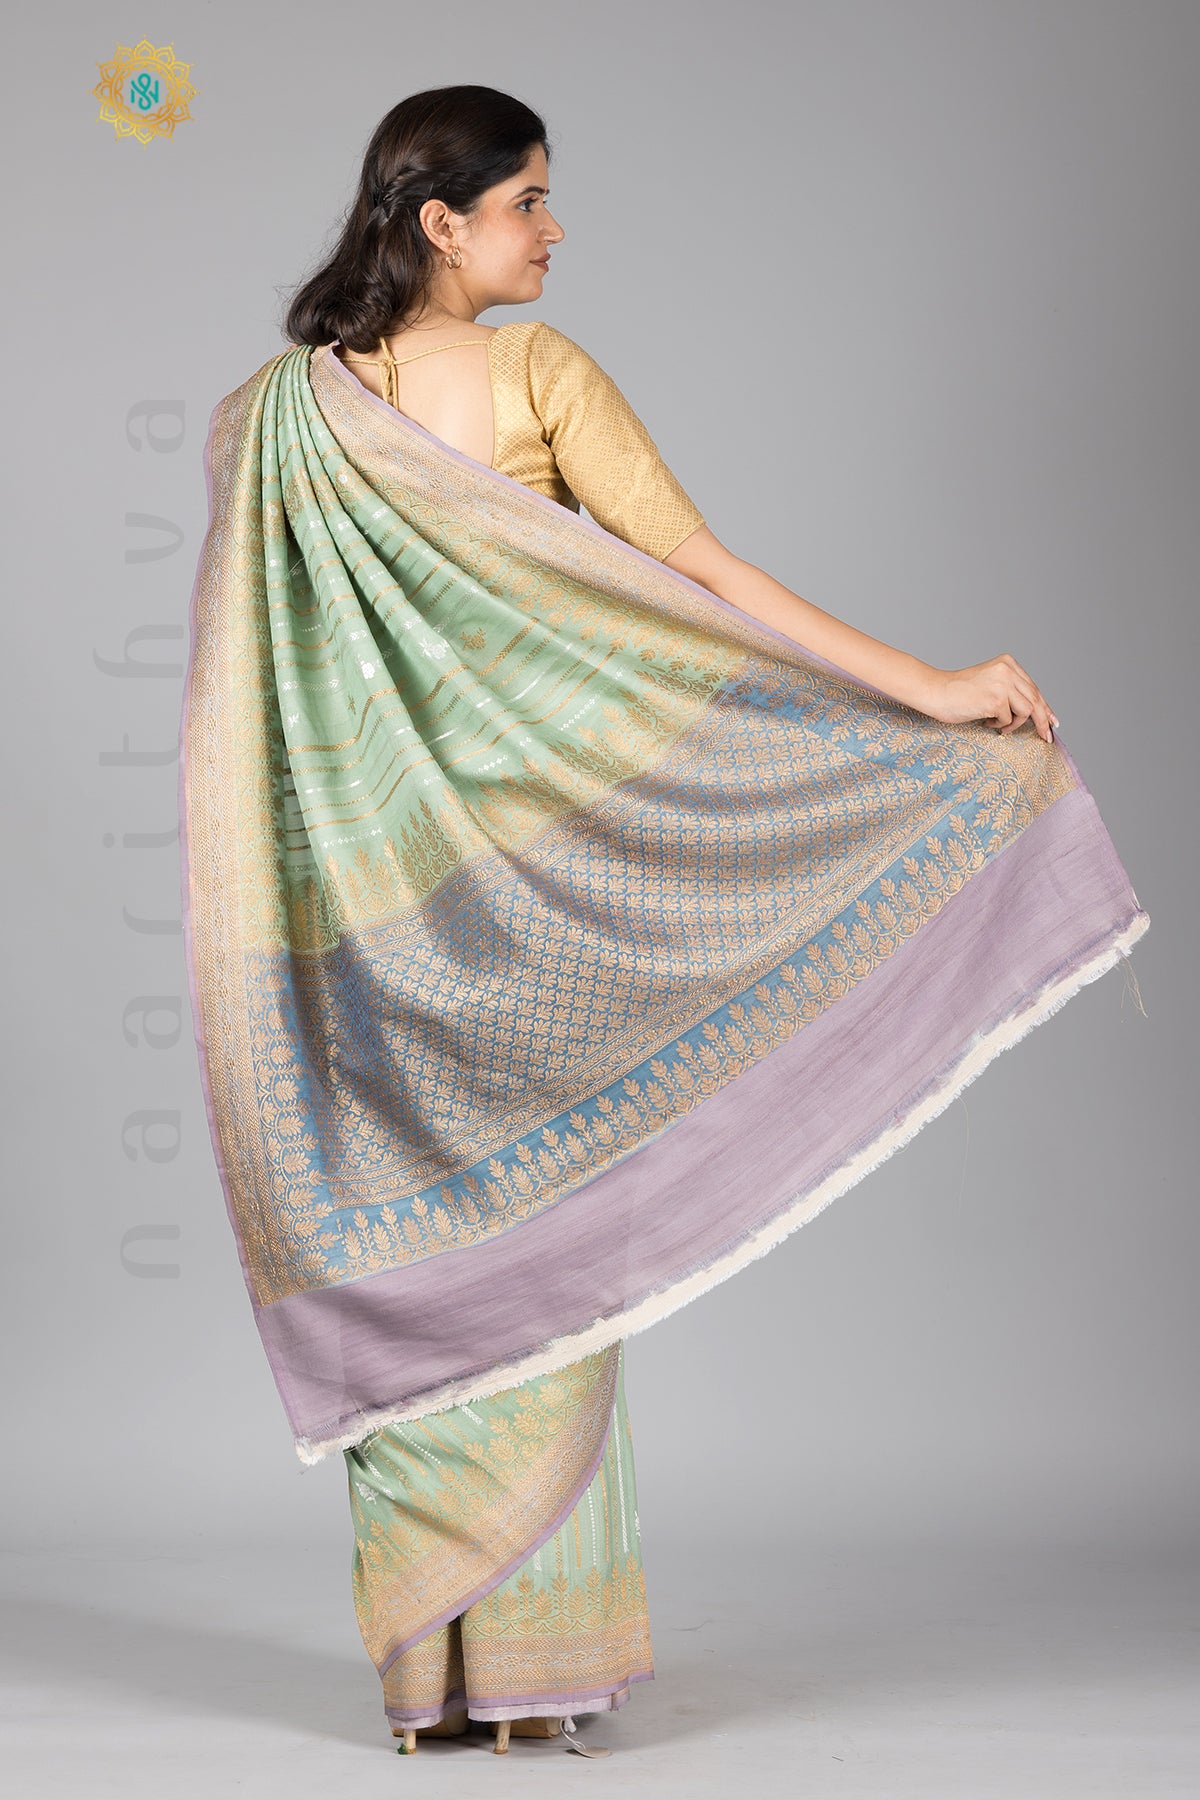 GREEN WITH LAVENDER - PURE HANDLOOM TUSSAR GEORGETTE WITH WATER ZARI WEAVES